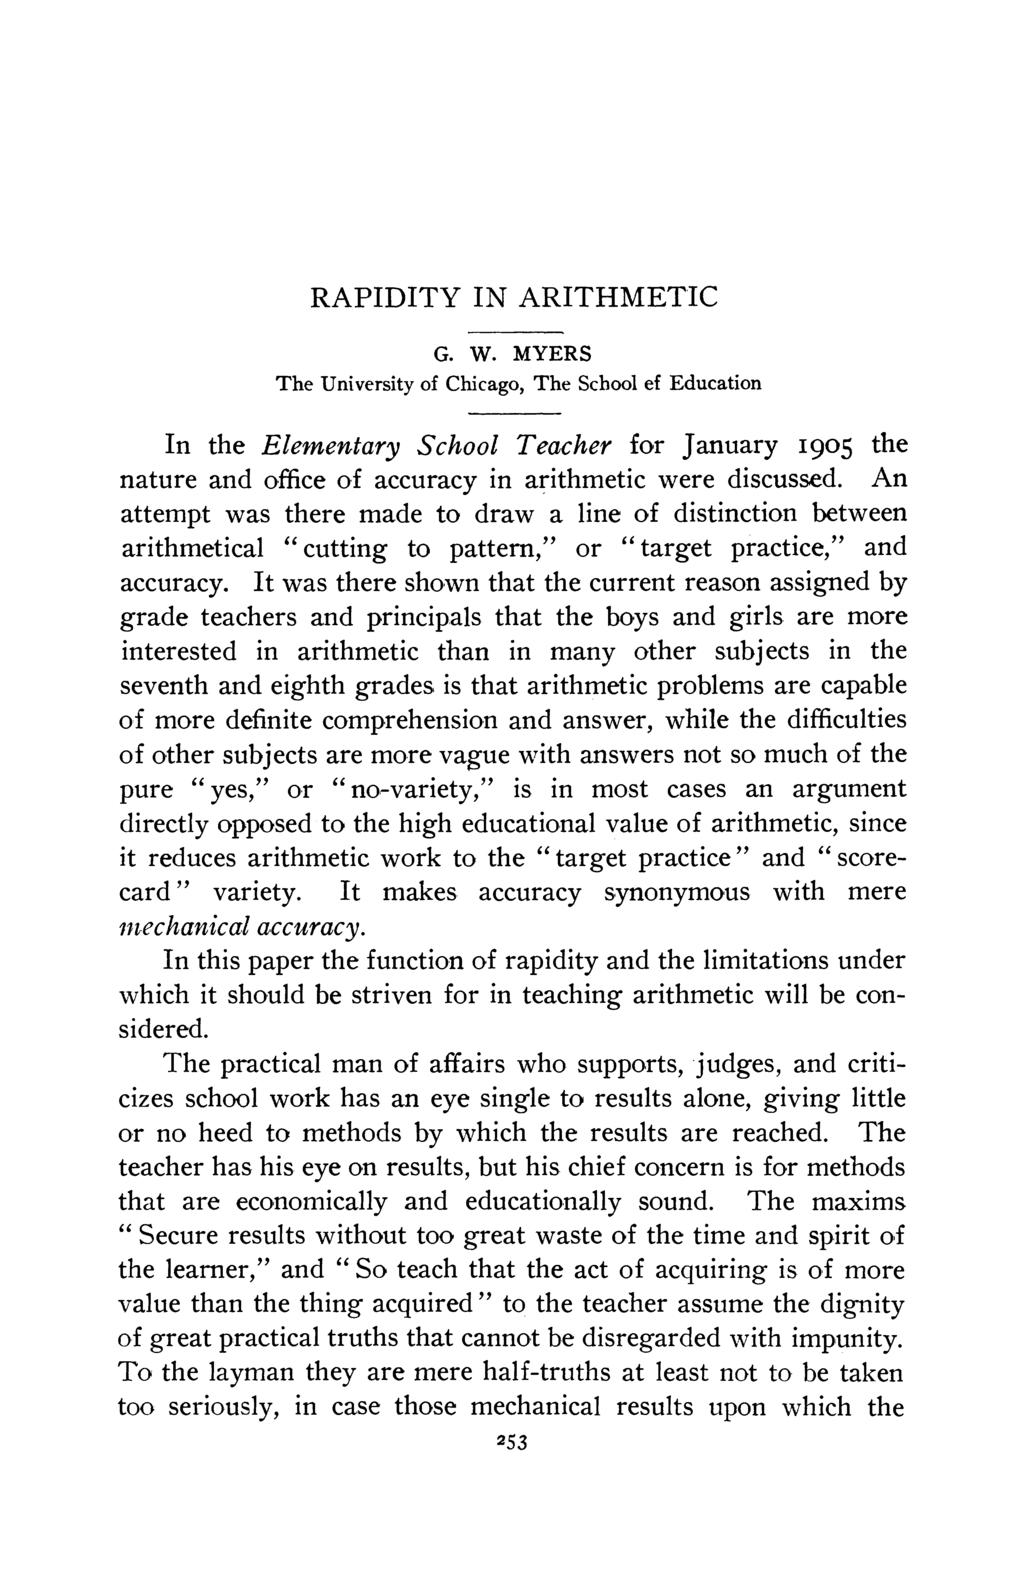 RAPIDITY IN ARITHMETIC G. W. MYERS The University of Chicago, The School ef Education In the Elementary School Teacher for January 1905 the nature and office of accuracy in arithmetic were discussed.